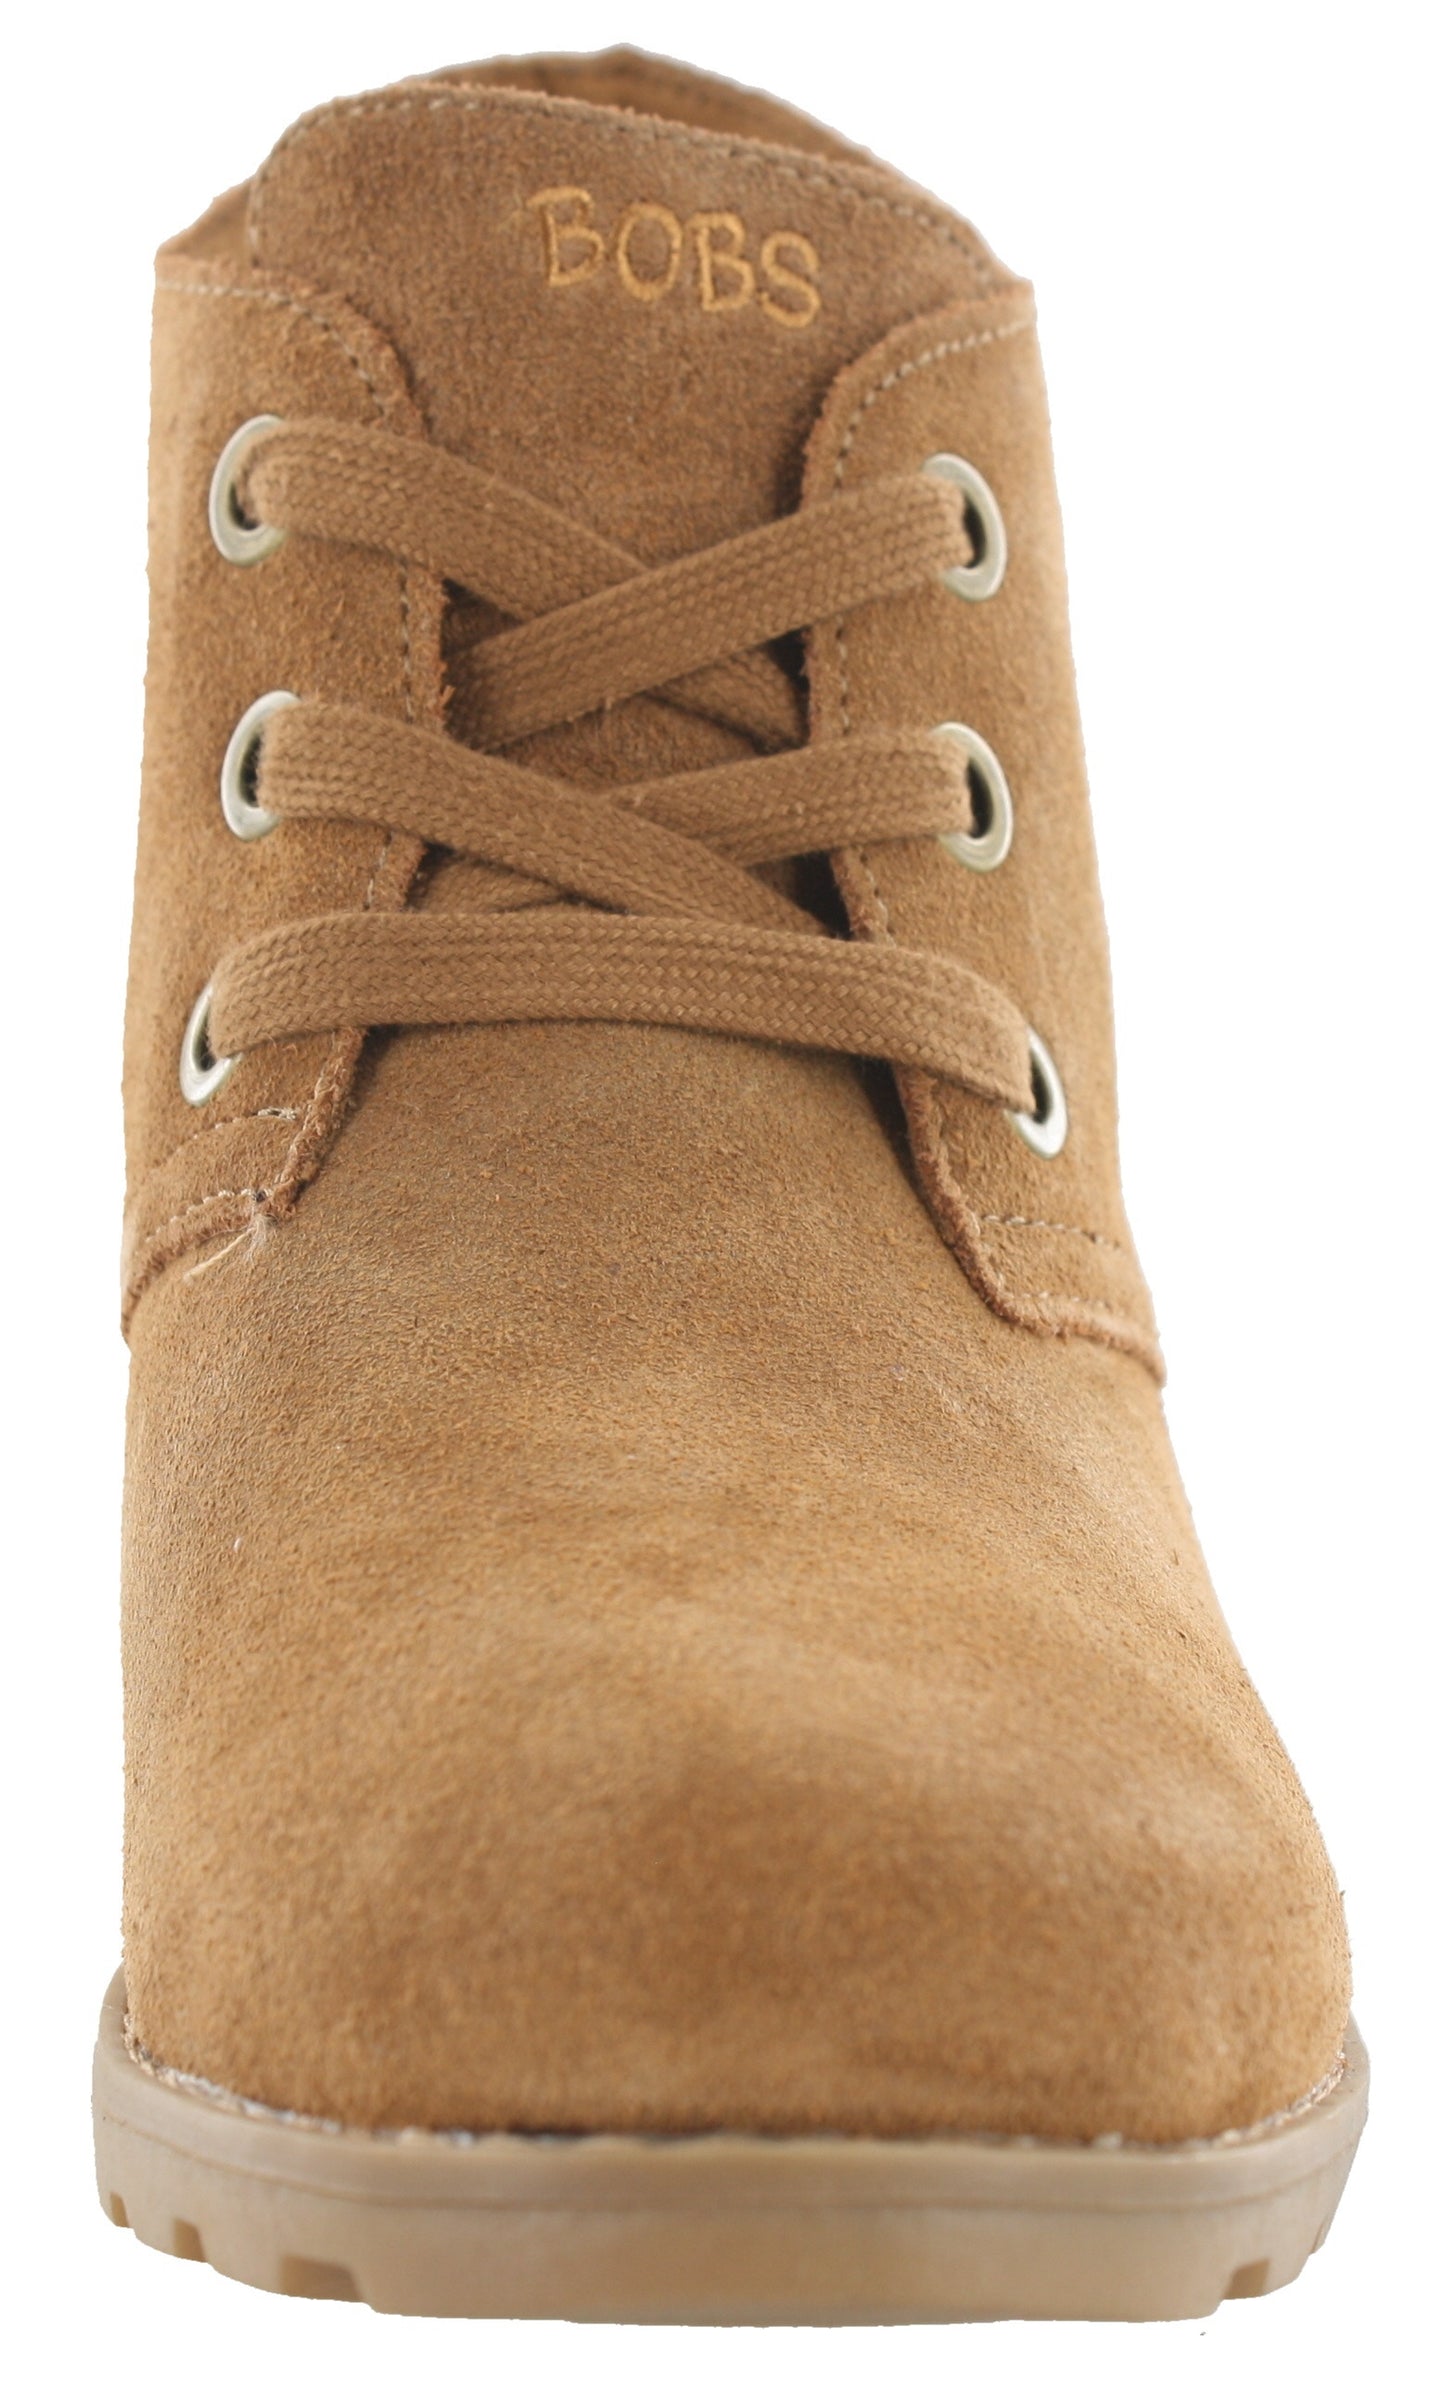 
                  
                    Skechers Women Tumble Weed Ghost Town Wedge Ankle Chukka Boots
                  
                